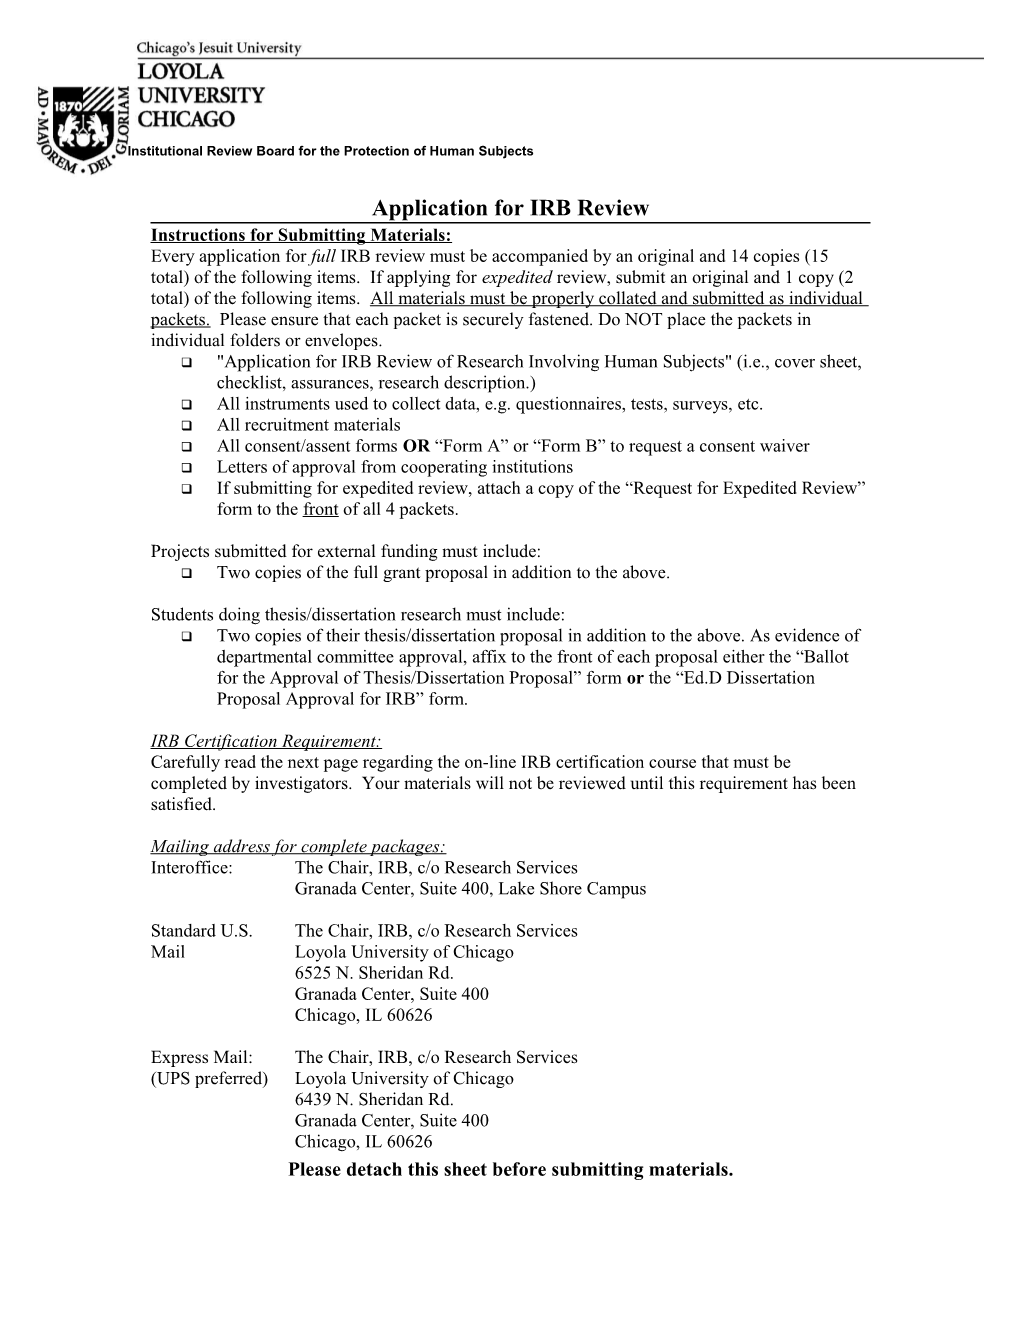 Application for IRB Review